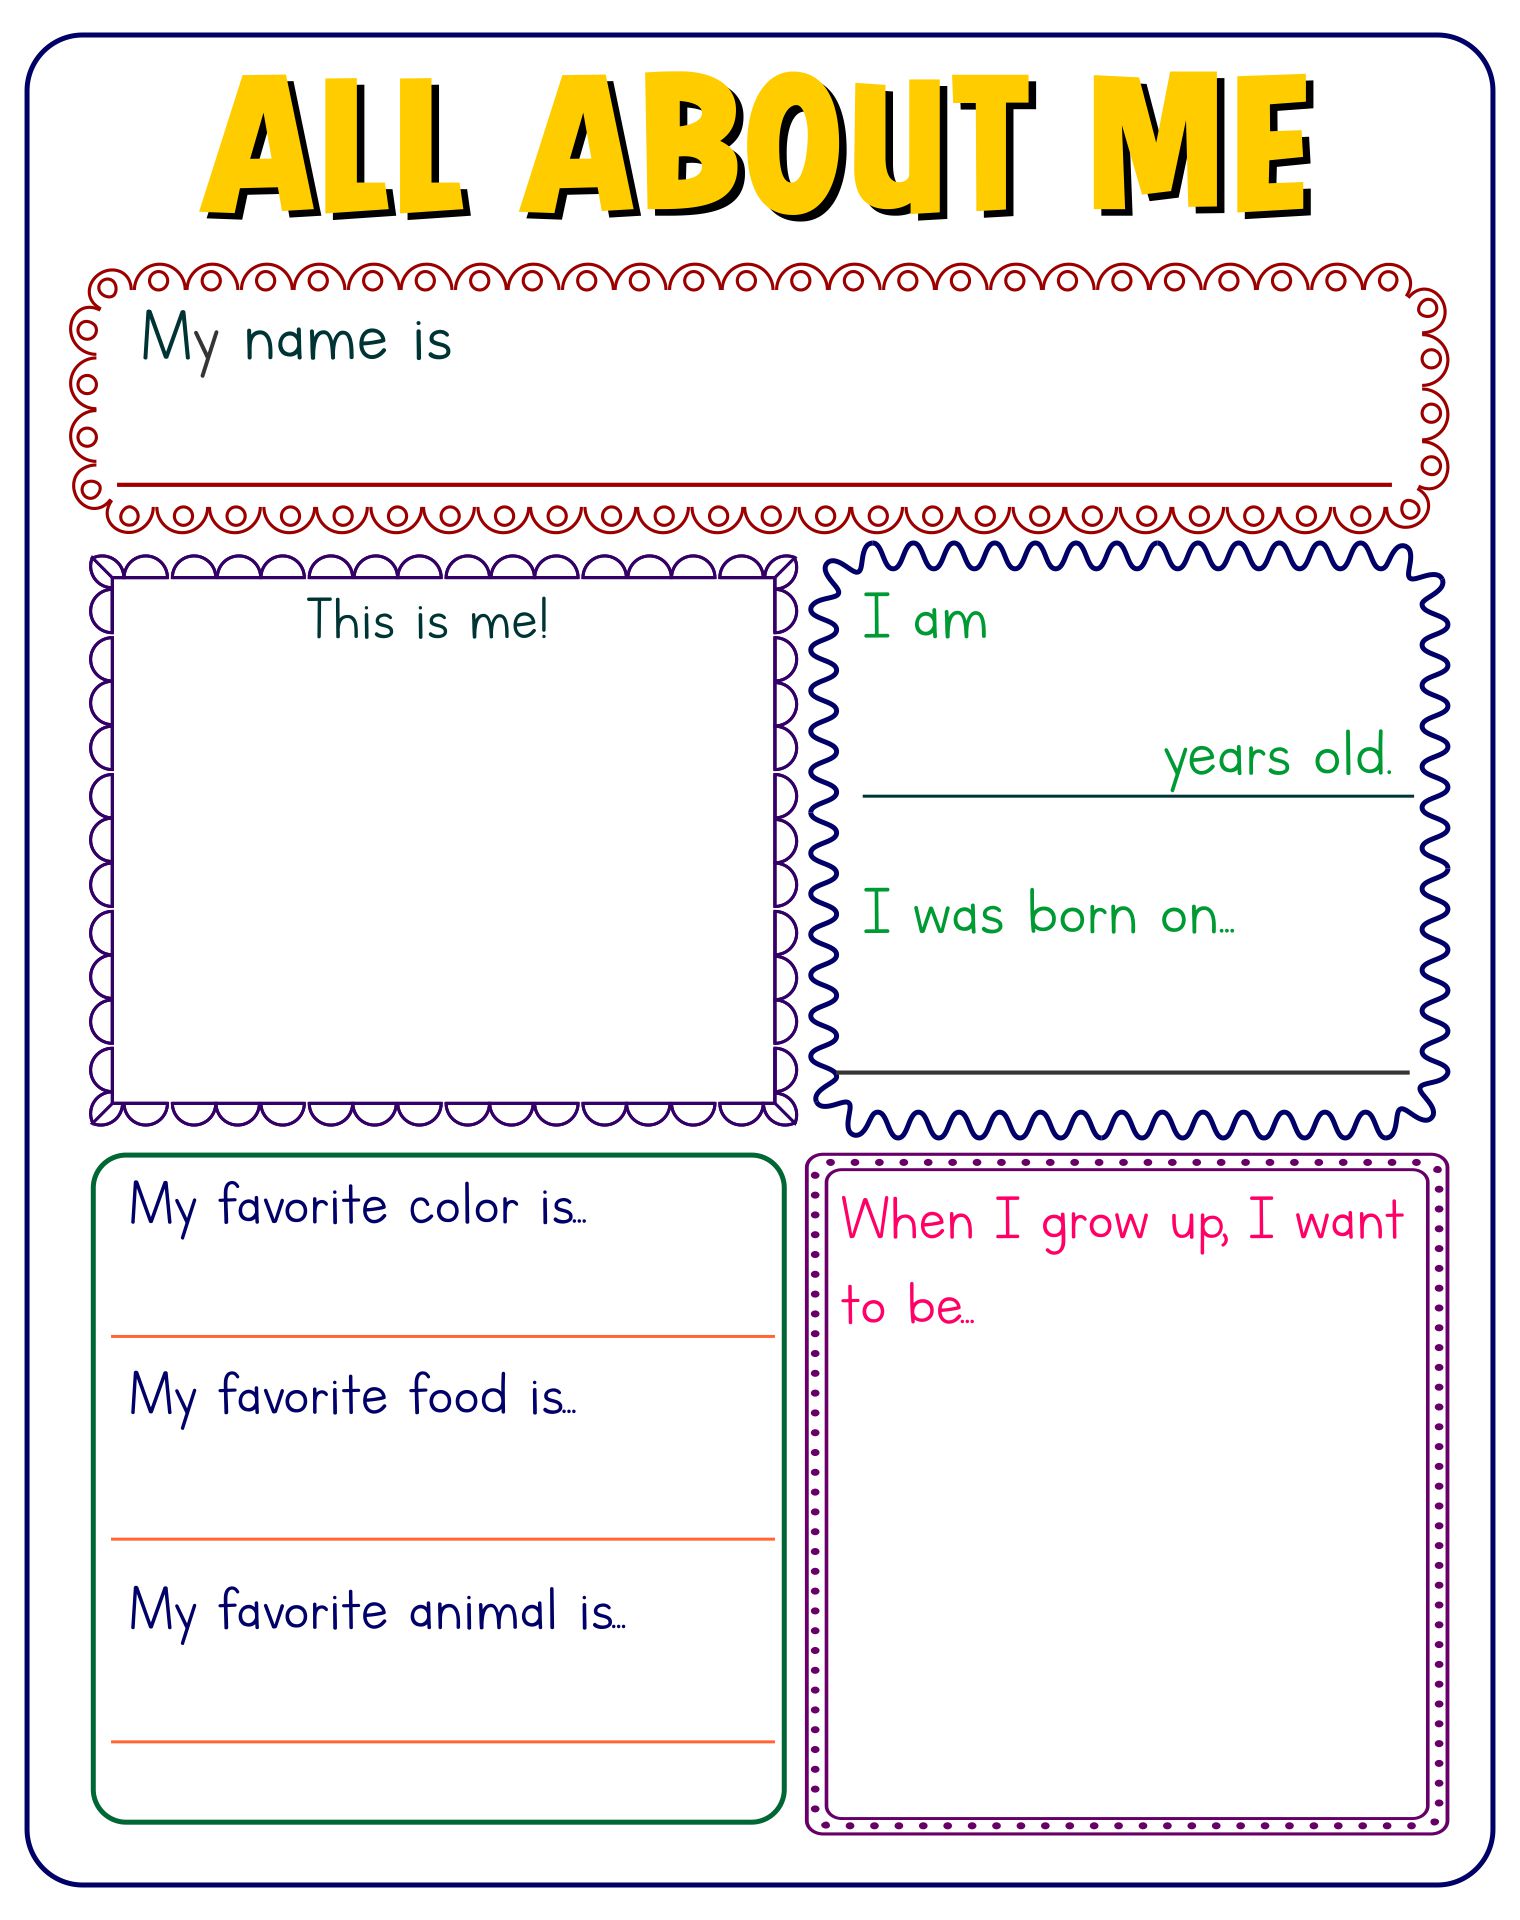 11-all-about-me-ideas-in-2022-all-about-me-all-about-me-printable-all-about-me-worksheet